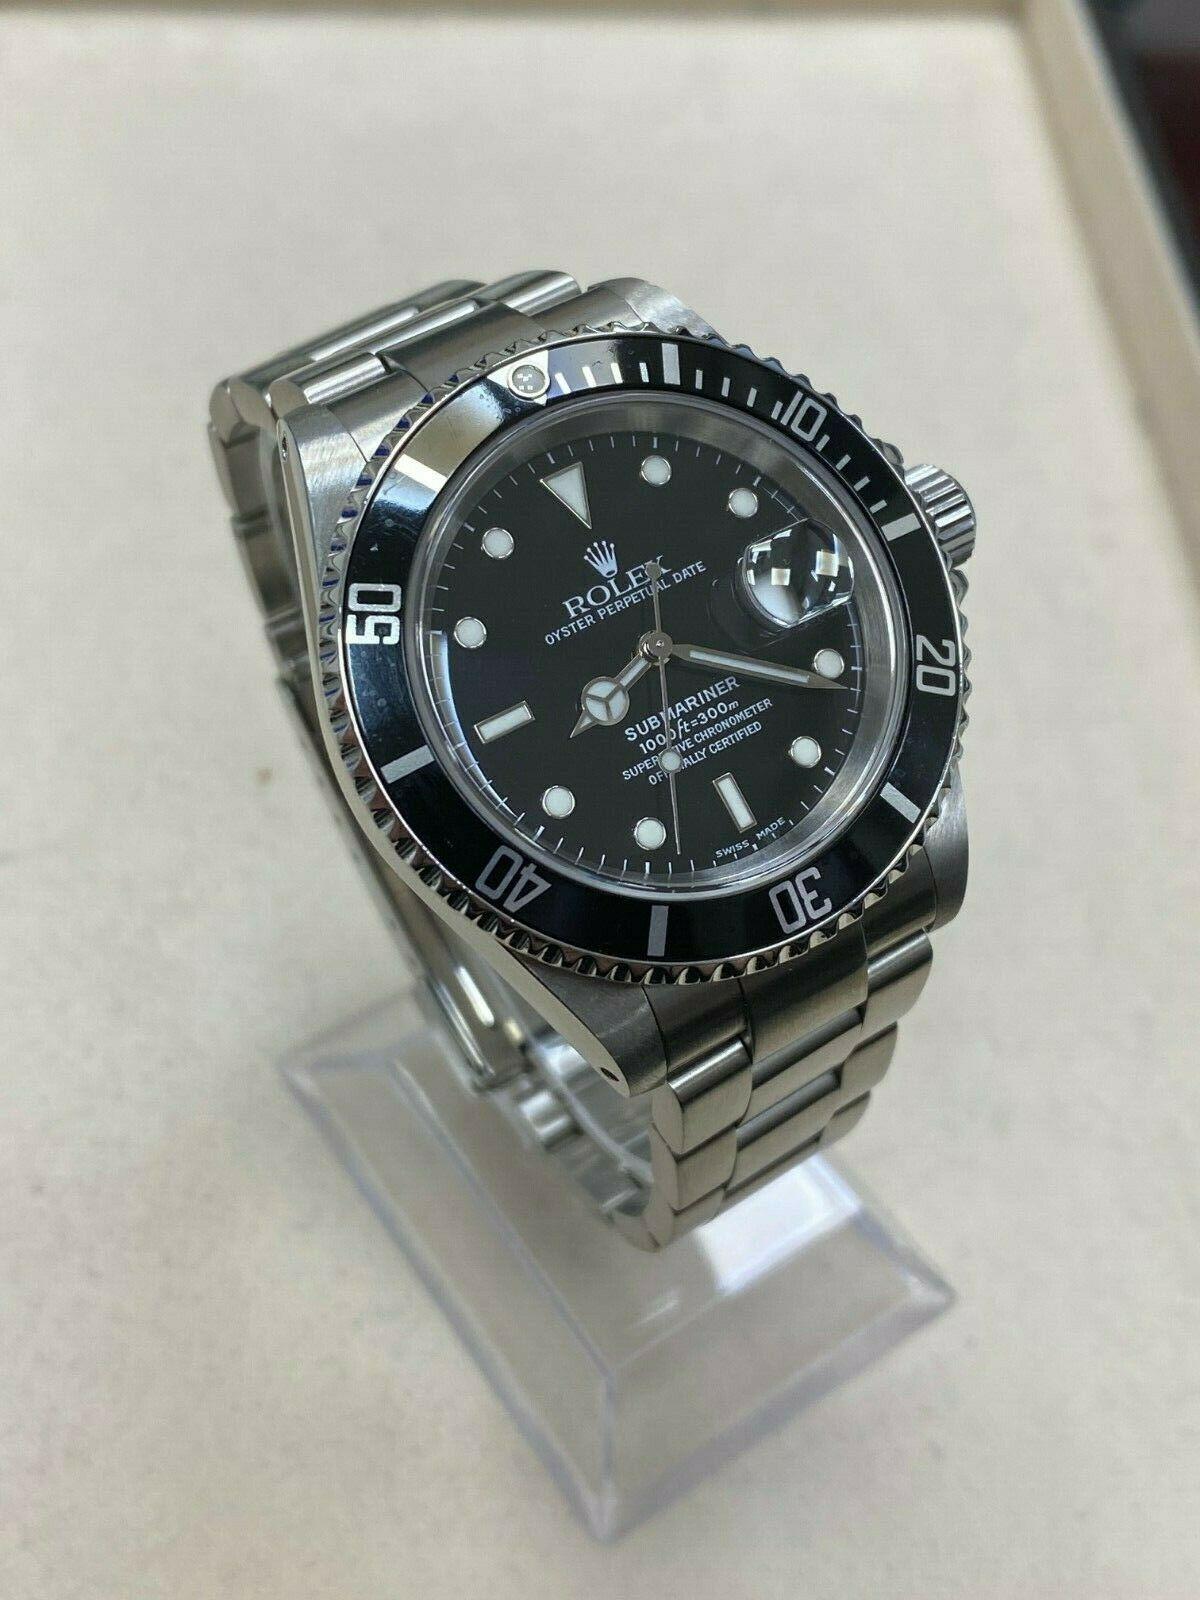 Style Number: 16110

 

Serial: K376***


Year: 2001

 

Model: Submariner

 

Case Material: Stainless Steel

 

Band: Stainless Steel

 

Bezel:  Black

 

Dial: Black

 

Face: Sapphire Crystal

 

Case Size: 40mm

 

Includes: 

-Elegant Watch